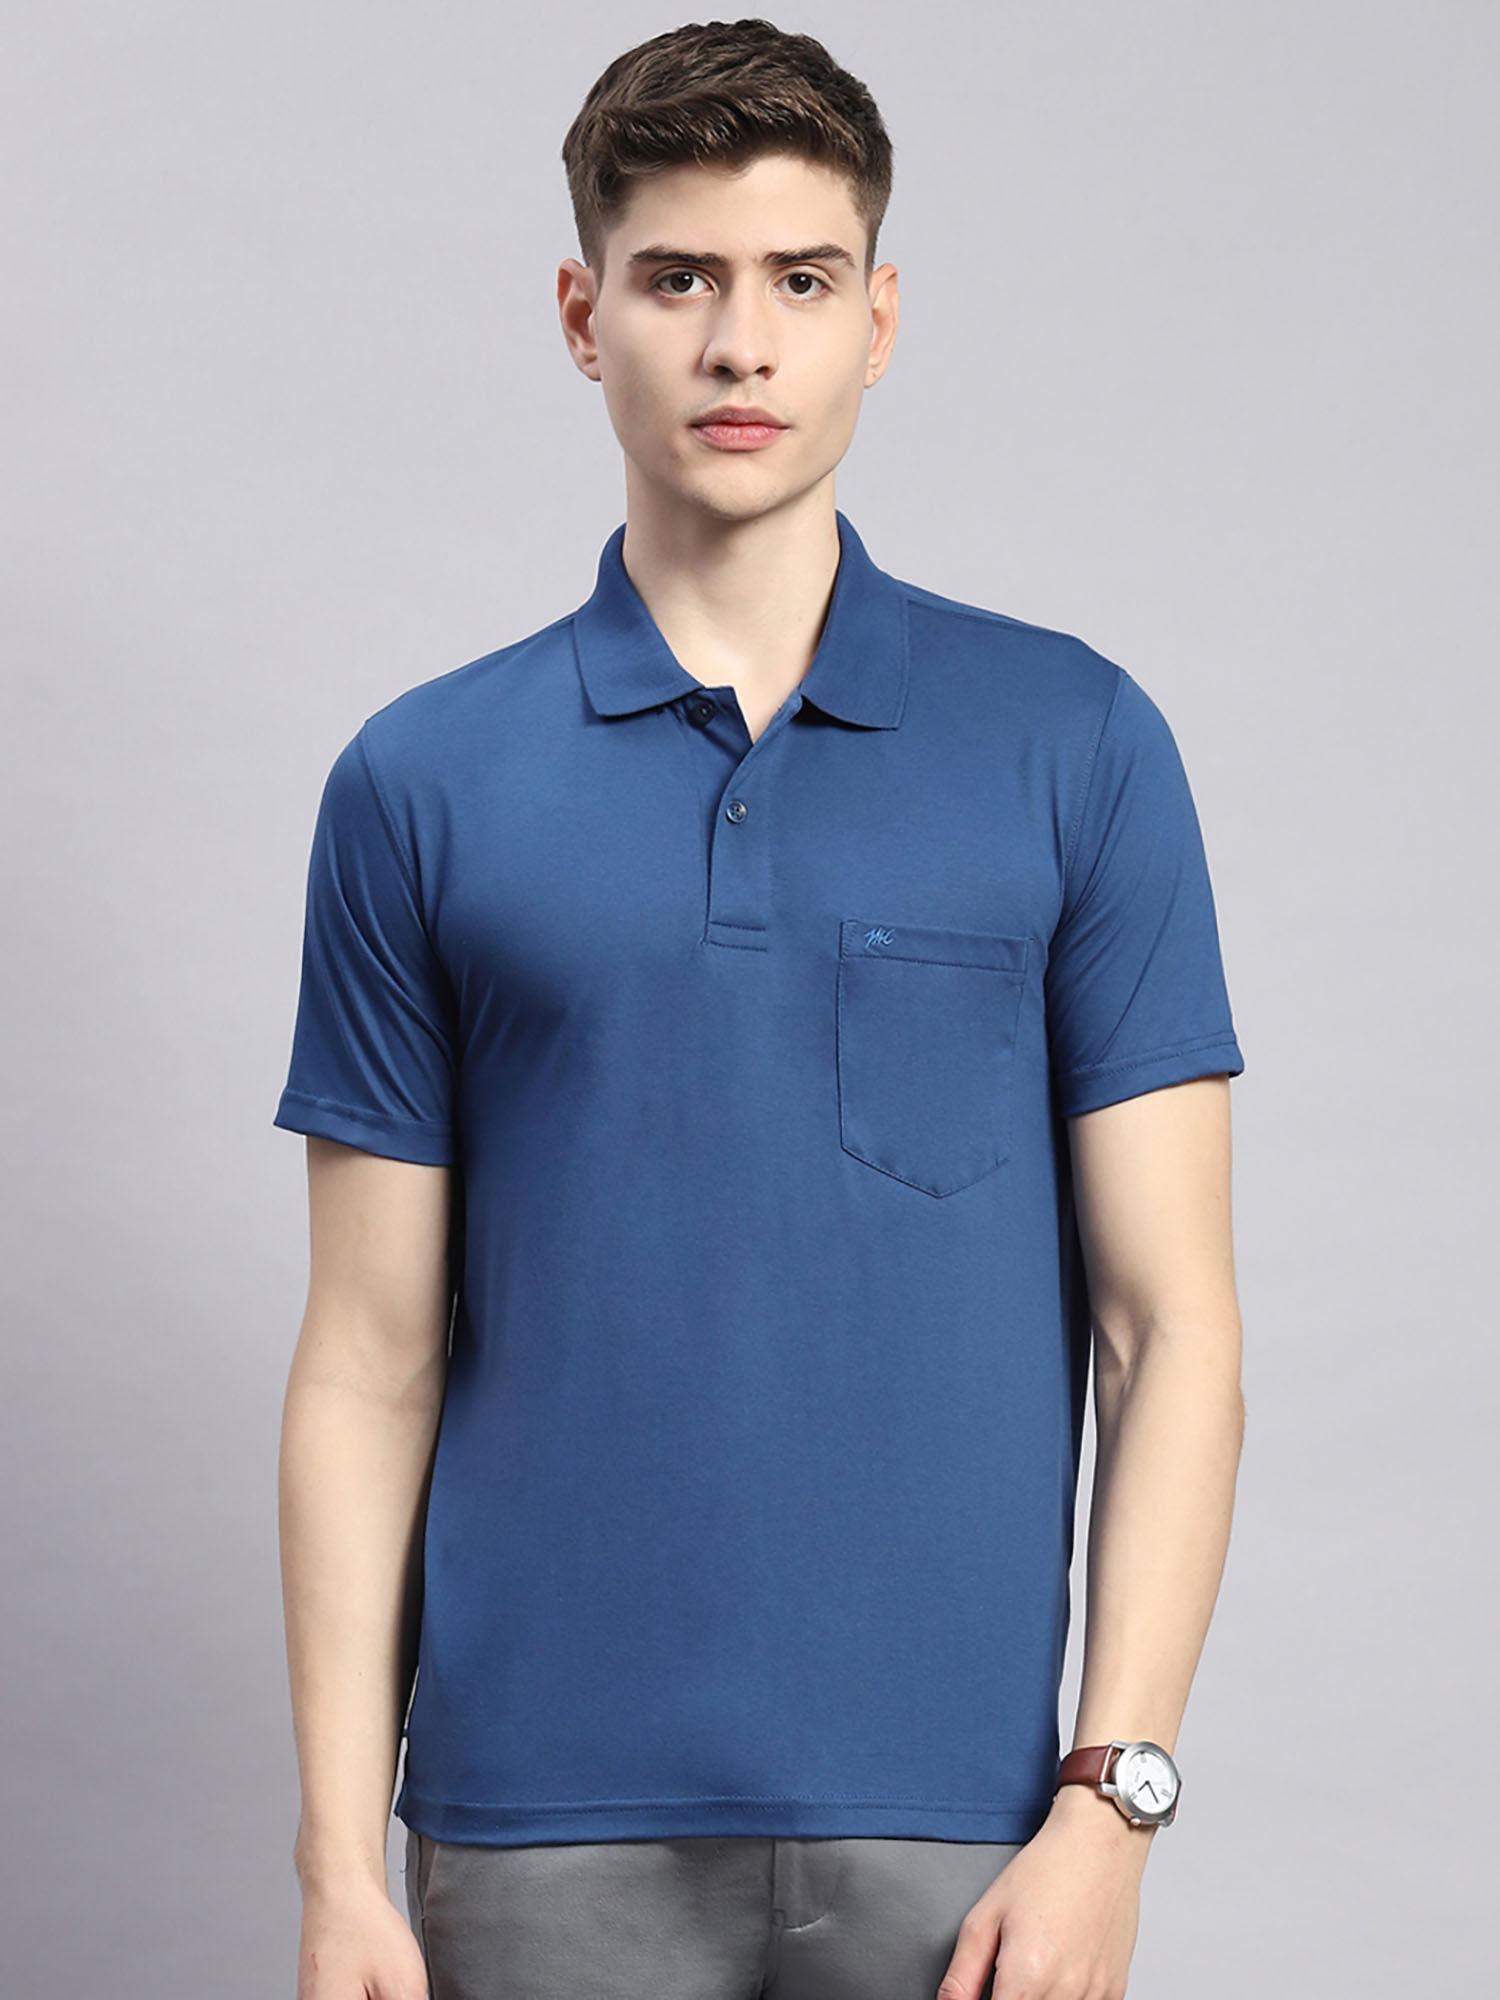 mens solid navy blue cotton blend polo collar half sleeve casual t-shirt